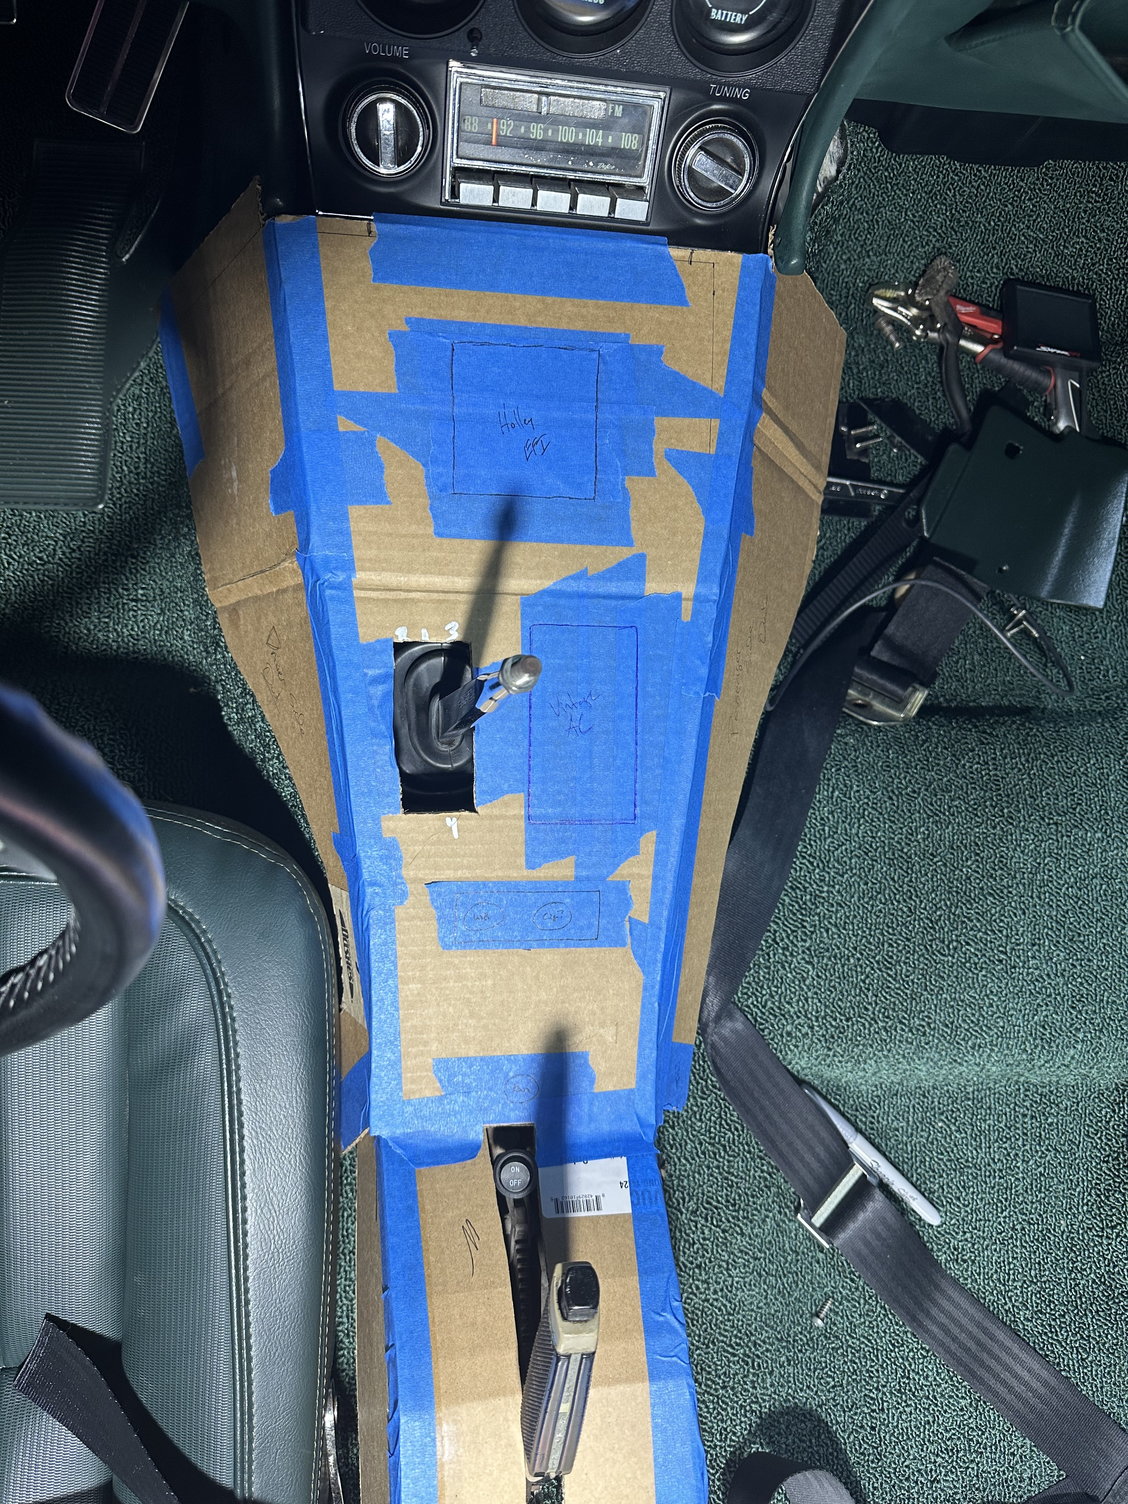 make your own center console